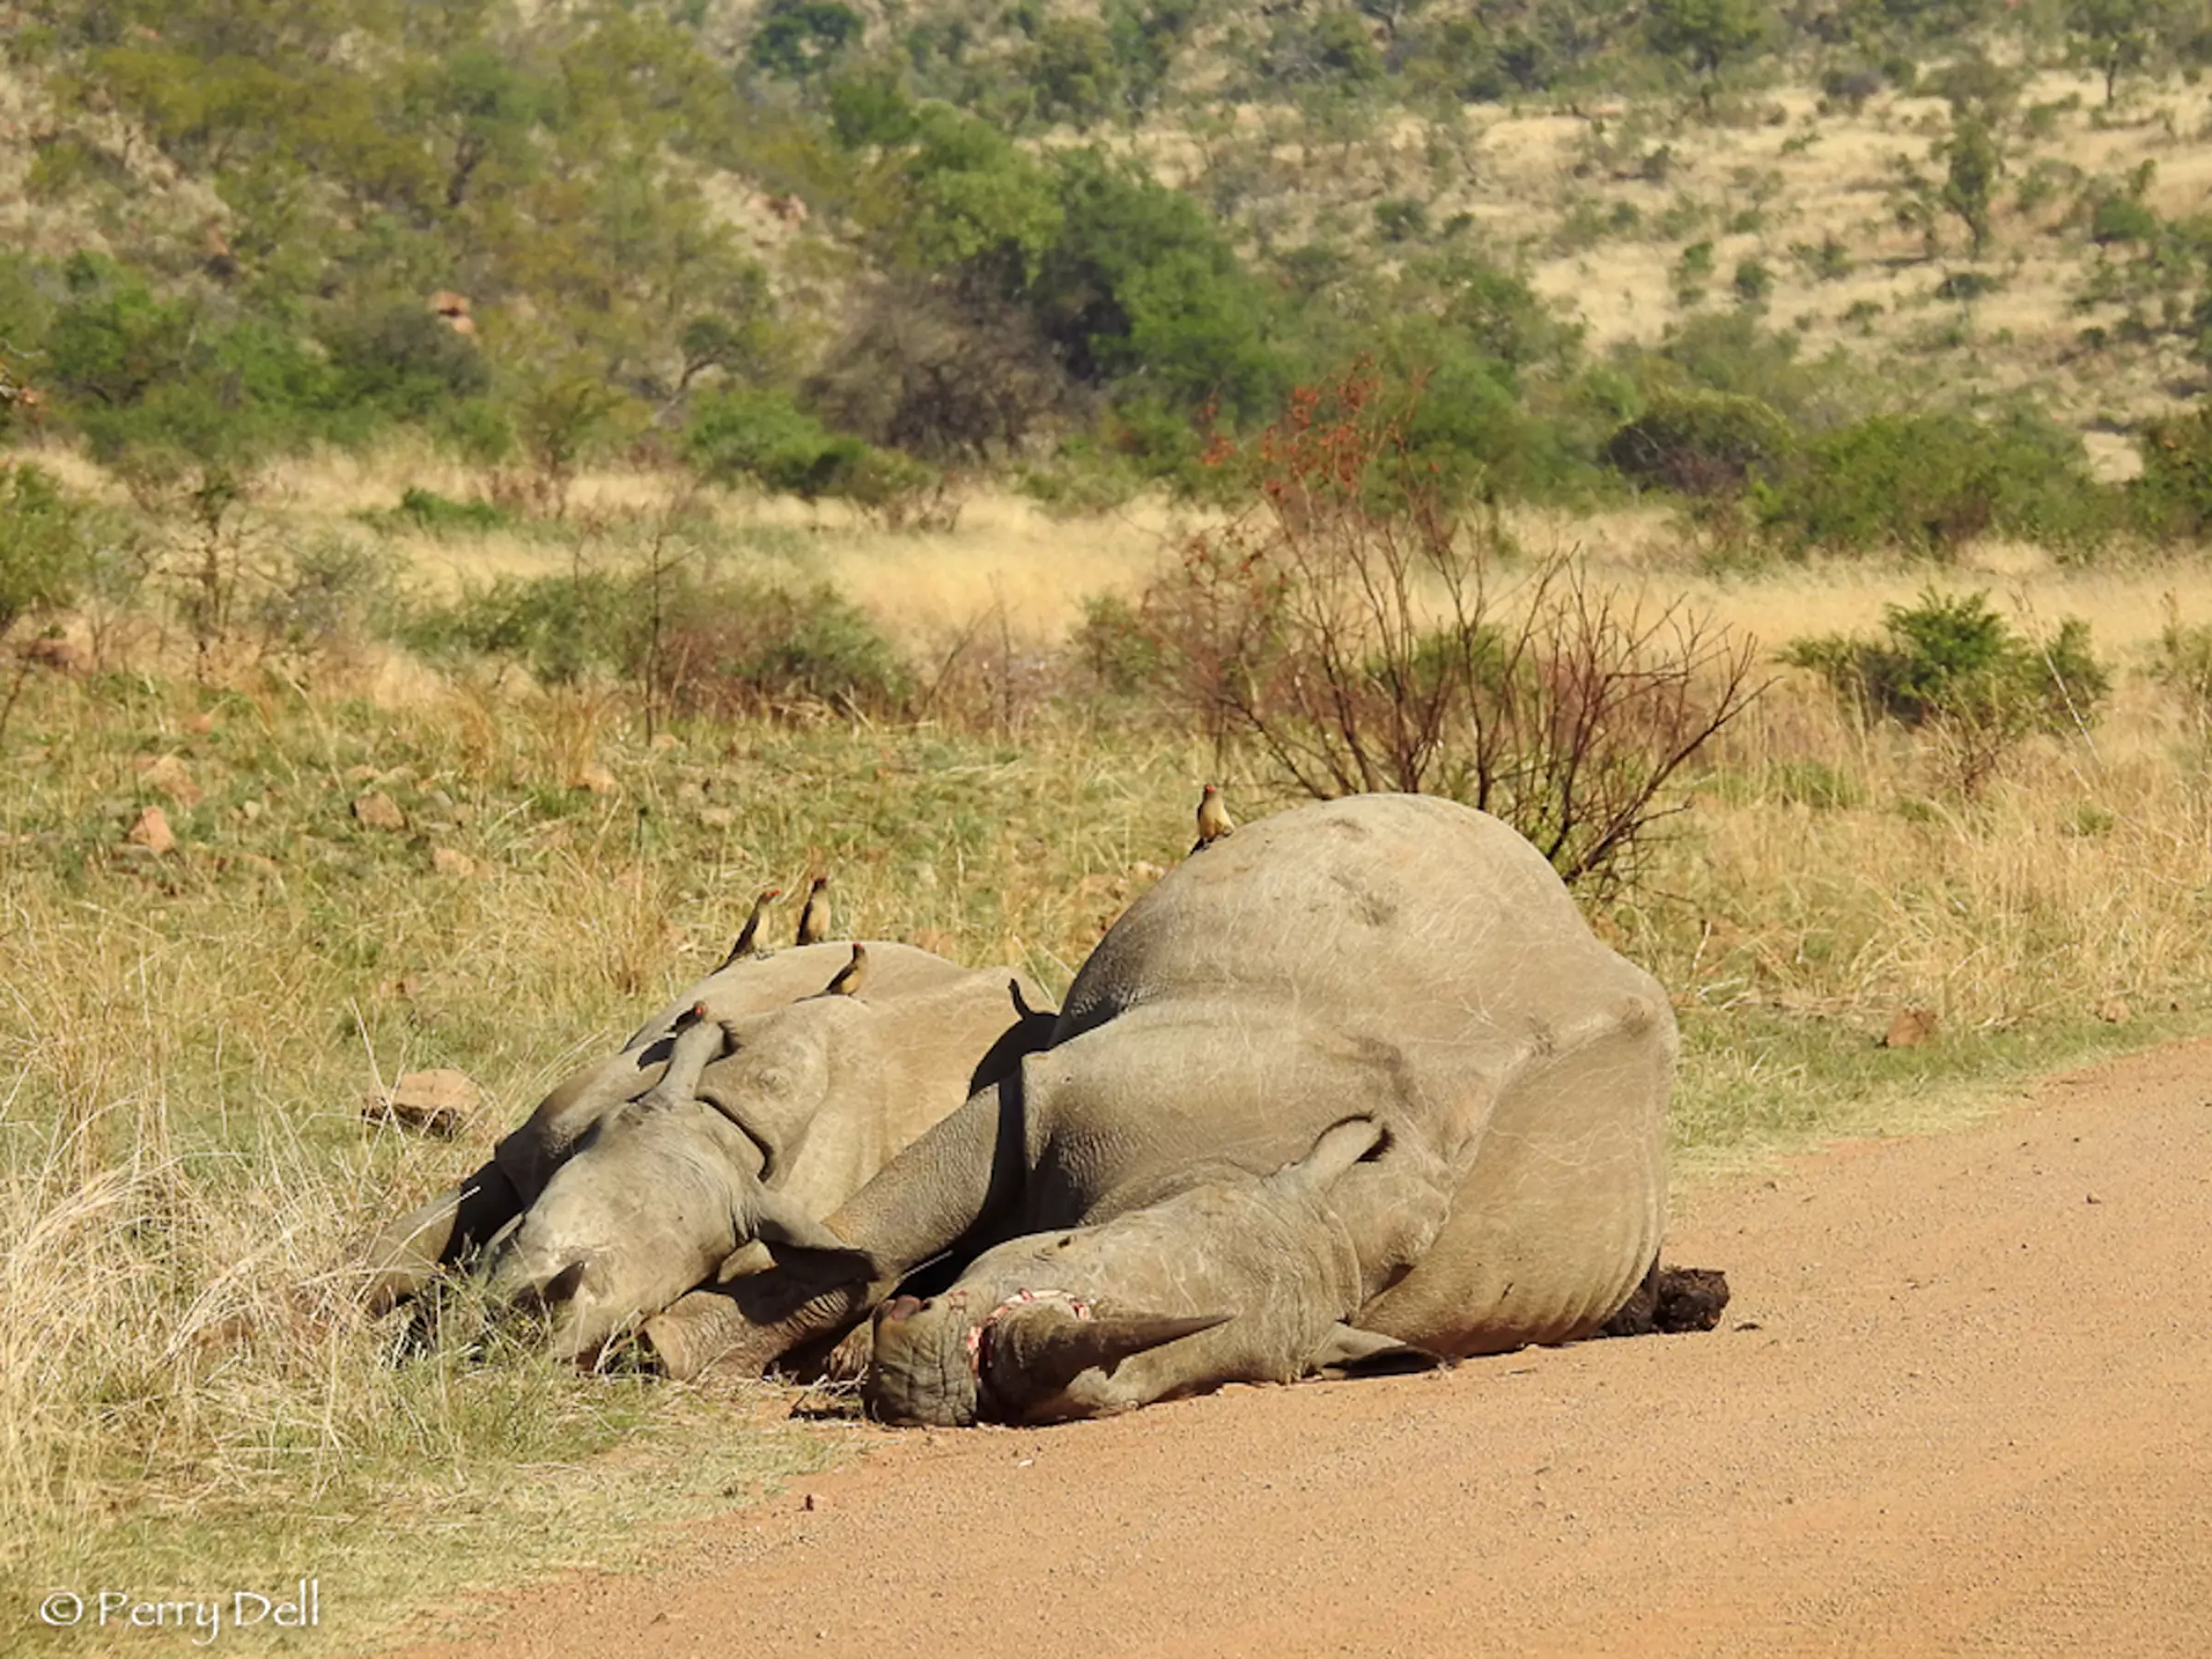 Poaching is a big contributor to the extinction of wild animals.